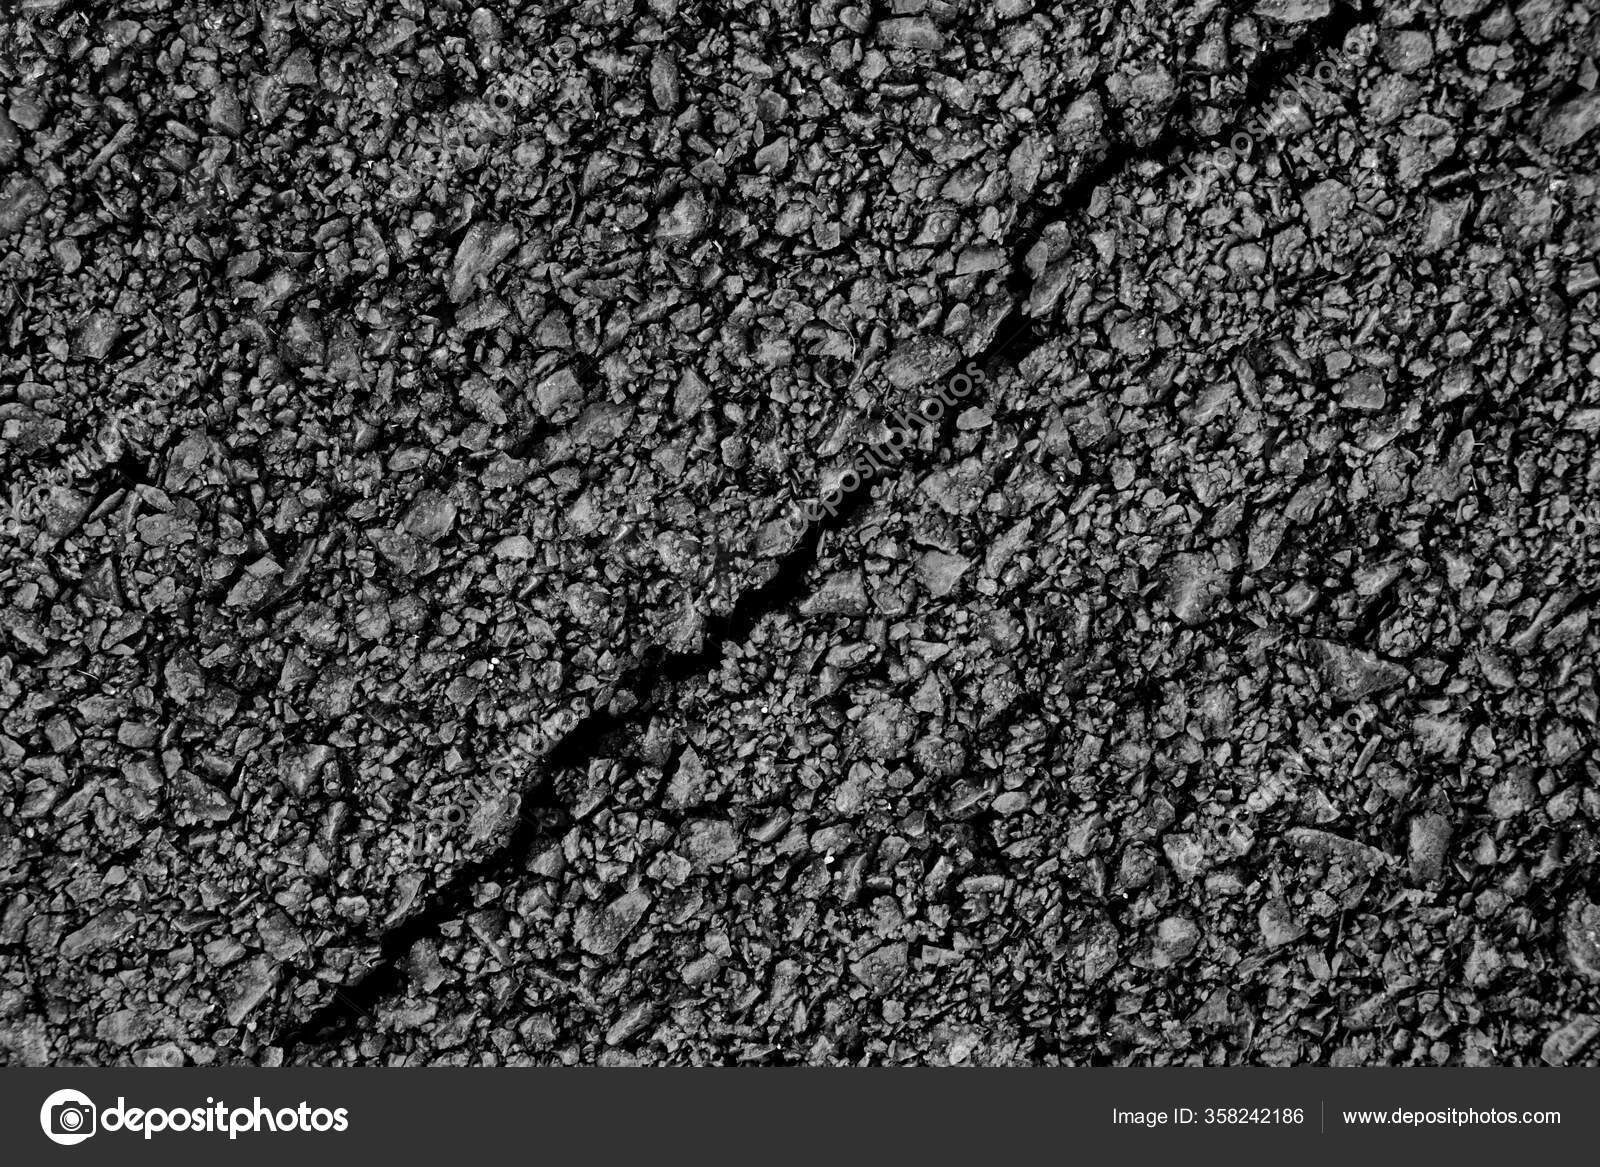 411 Black Compressed Charcoal Royalty-Free Images, Stock Photos